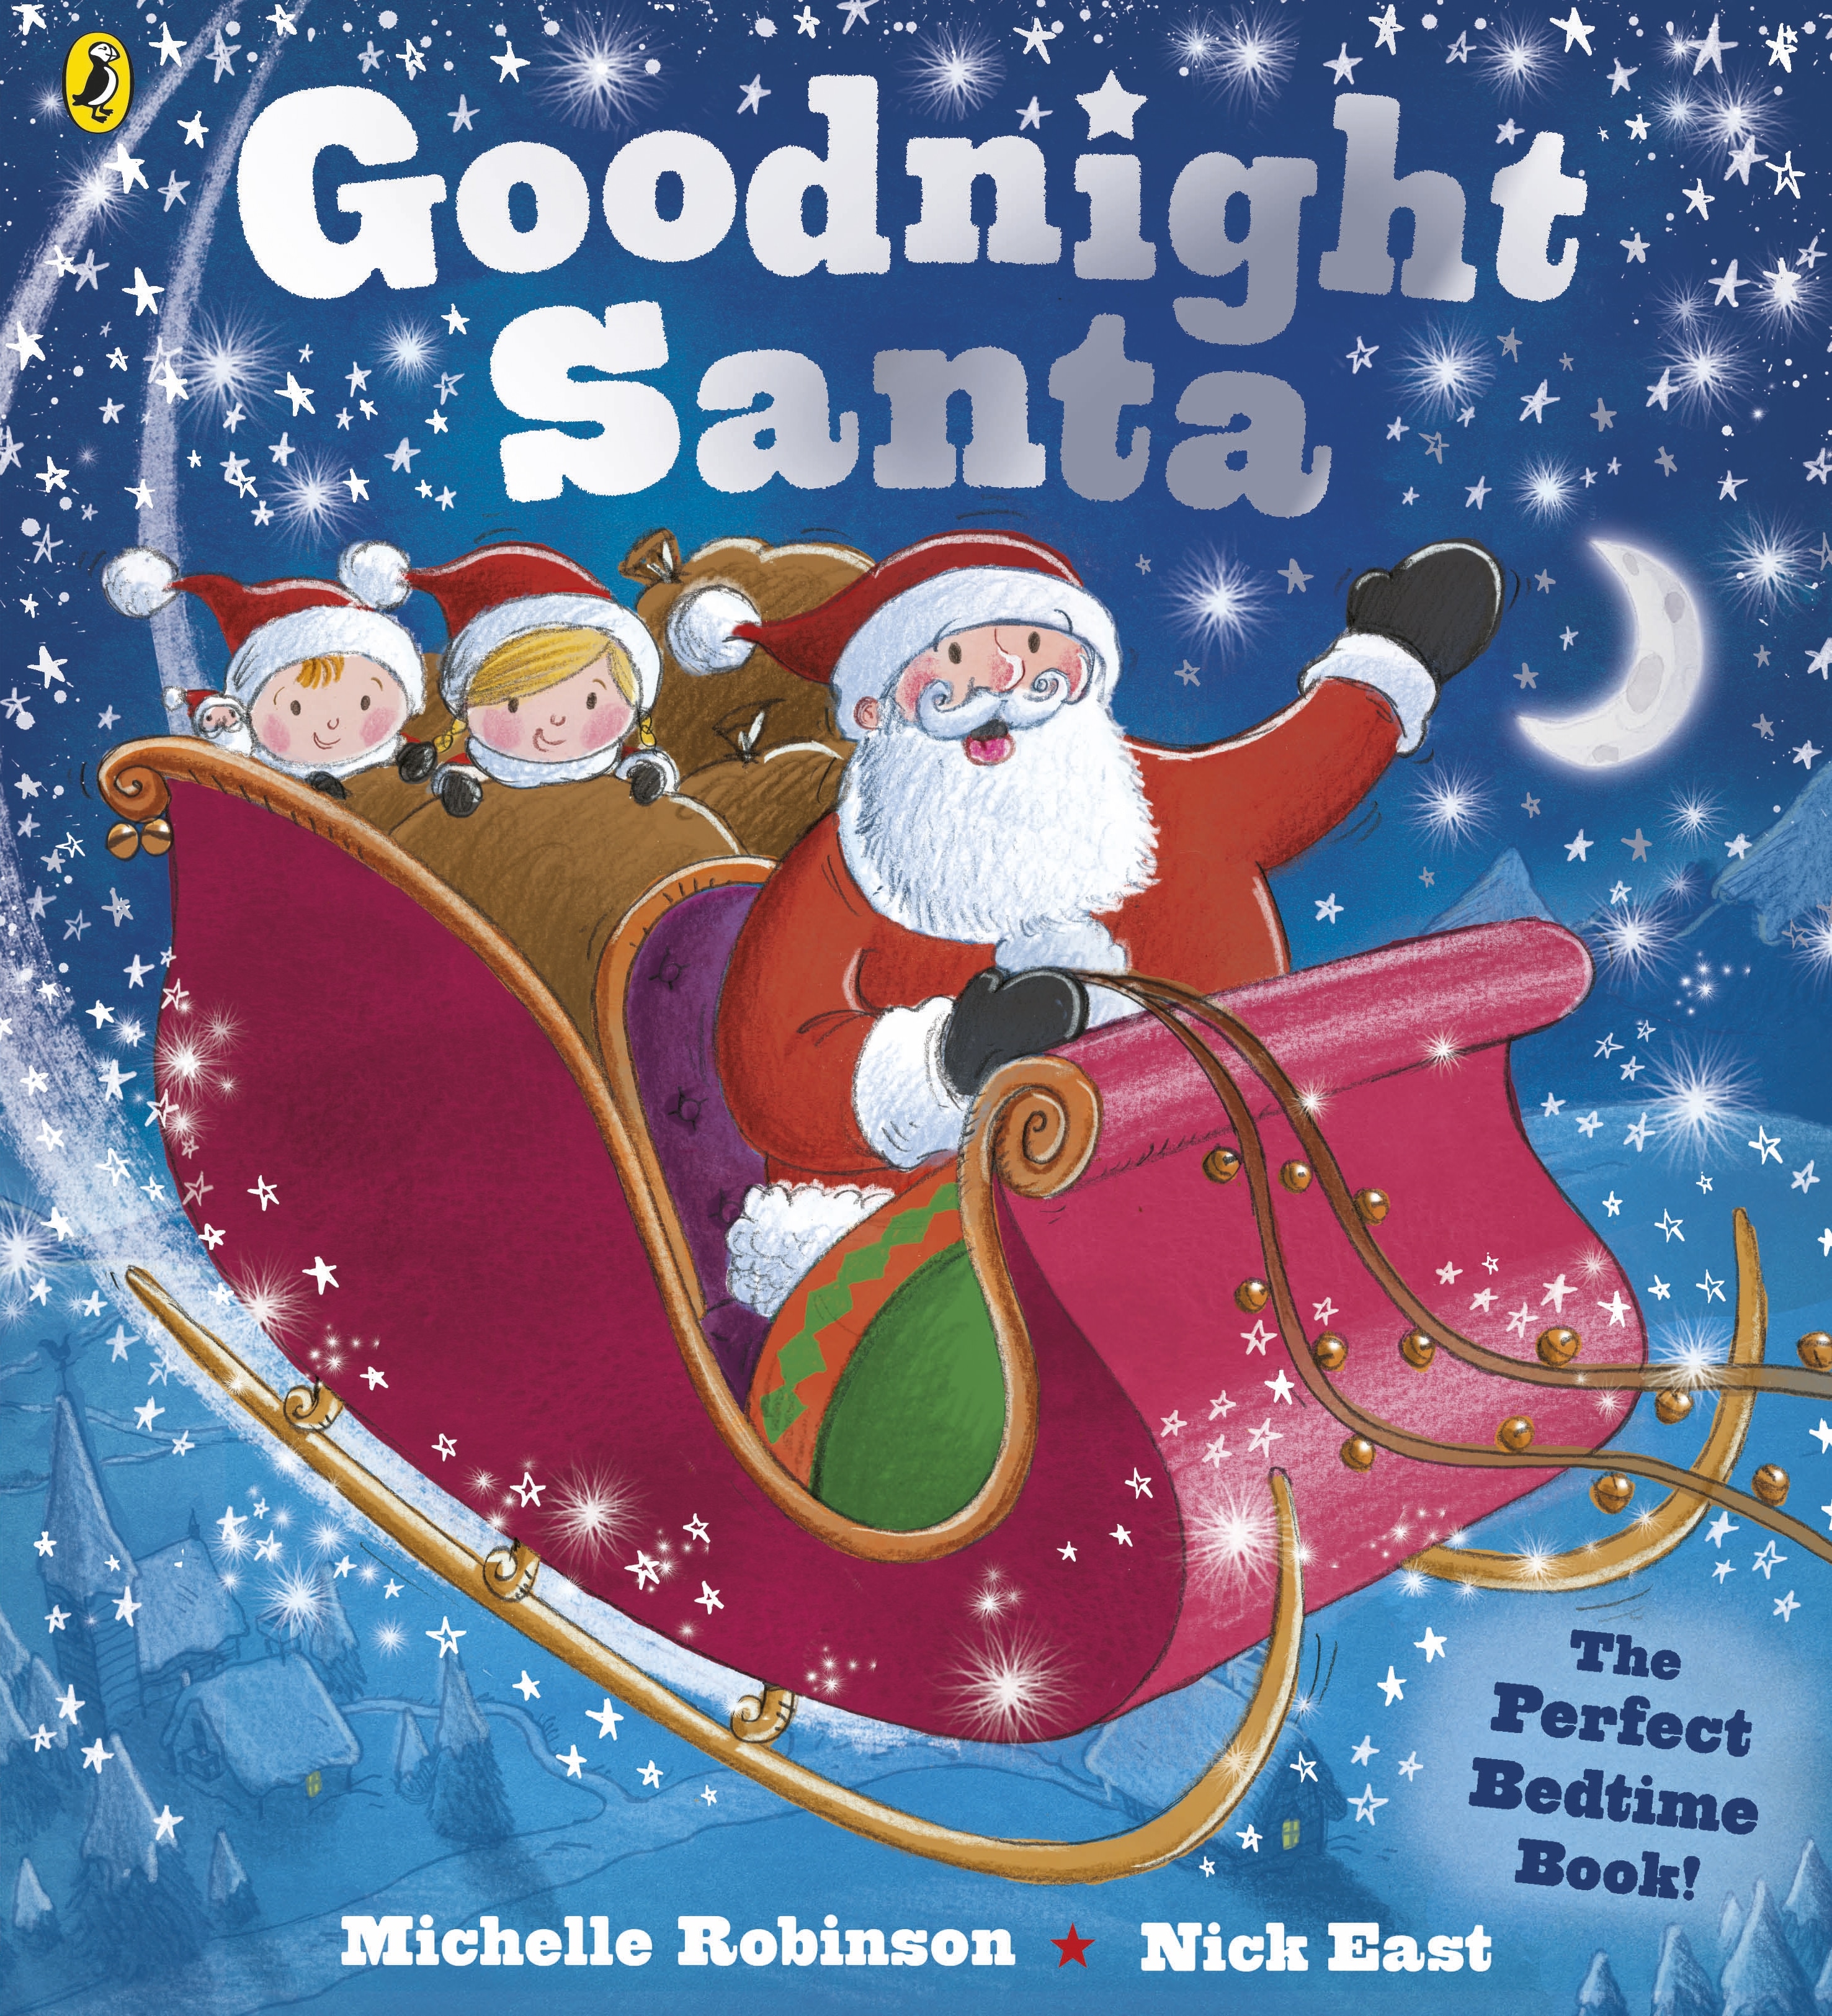 Book “Goodnight Santa” by Michelle Robinson — October 2, 2014